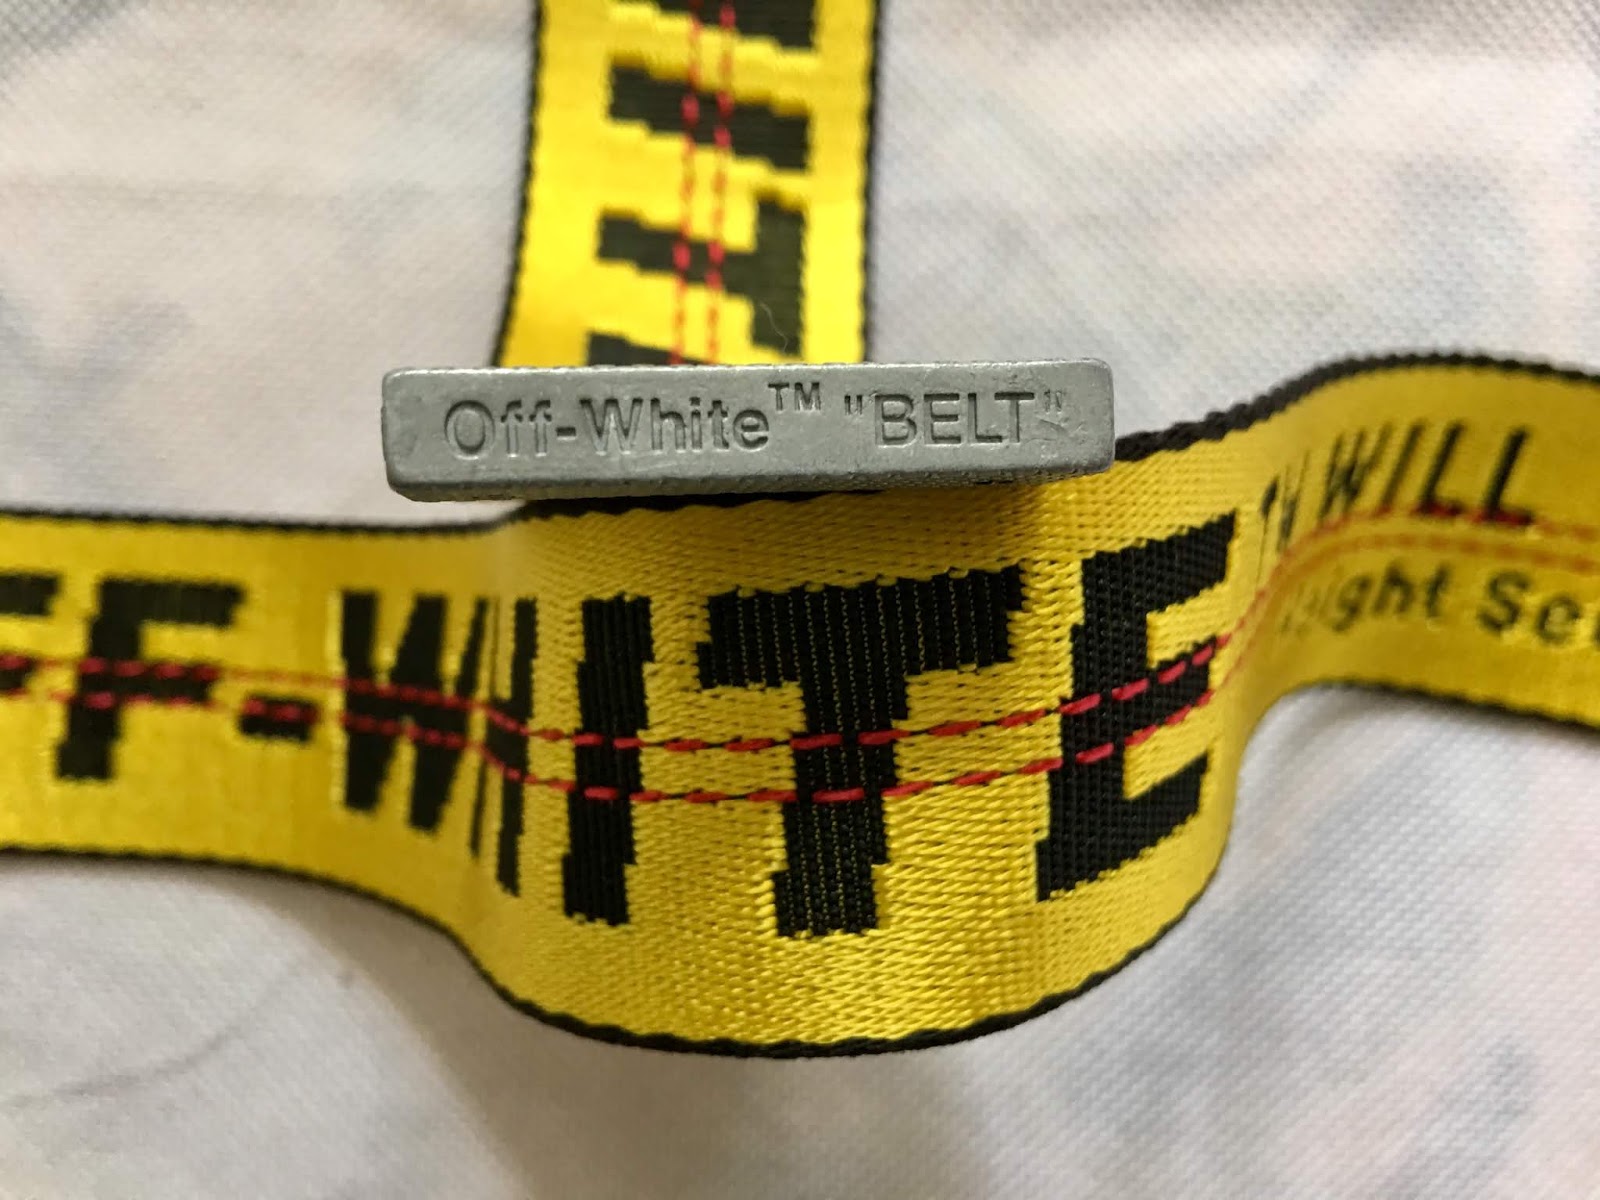 streetwear, skateboarding and clothing photo and video blog: Off-White Classic Industrial Yellow Belt Review